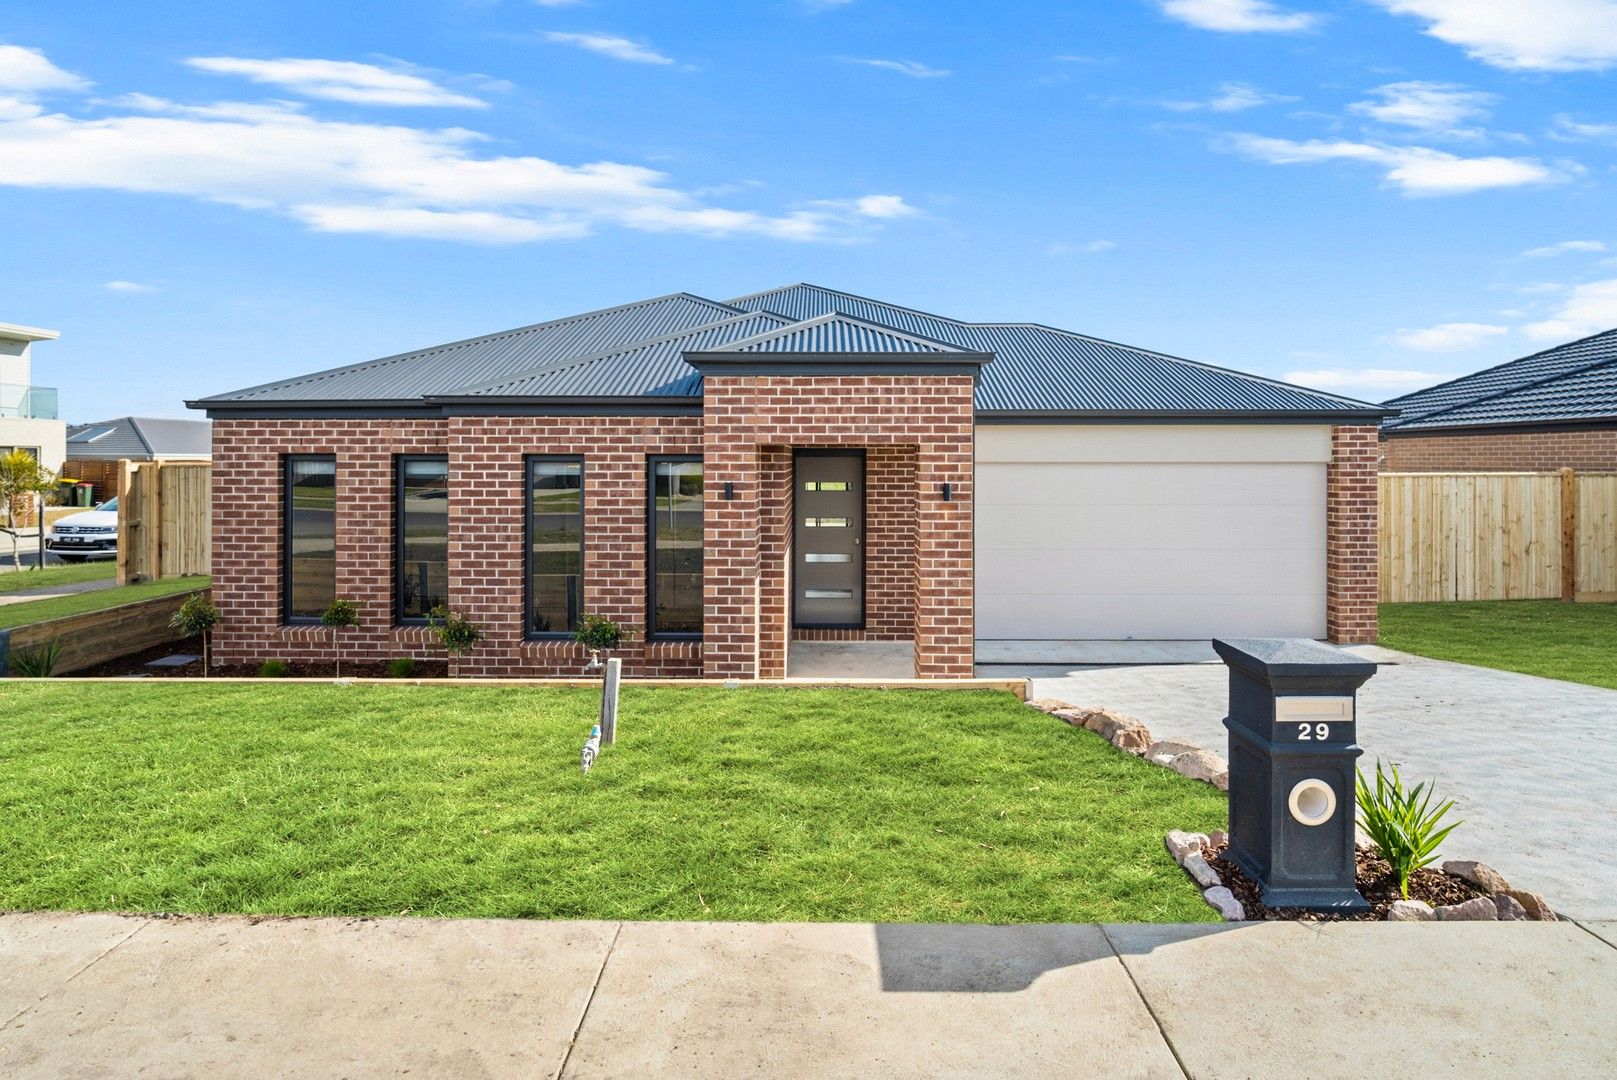 4 bedrooms House in 29 McNulty Drive TRARALGON VIC, 3844